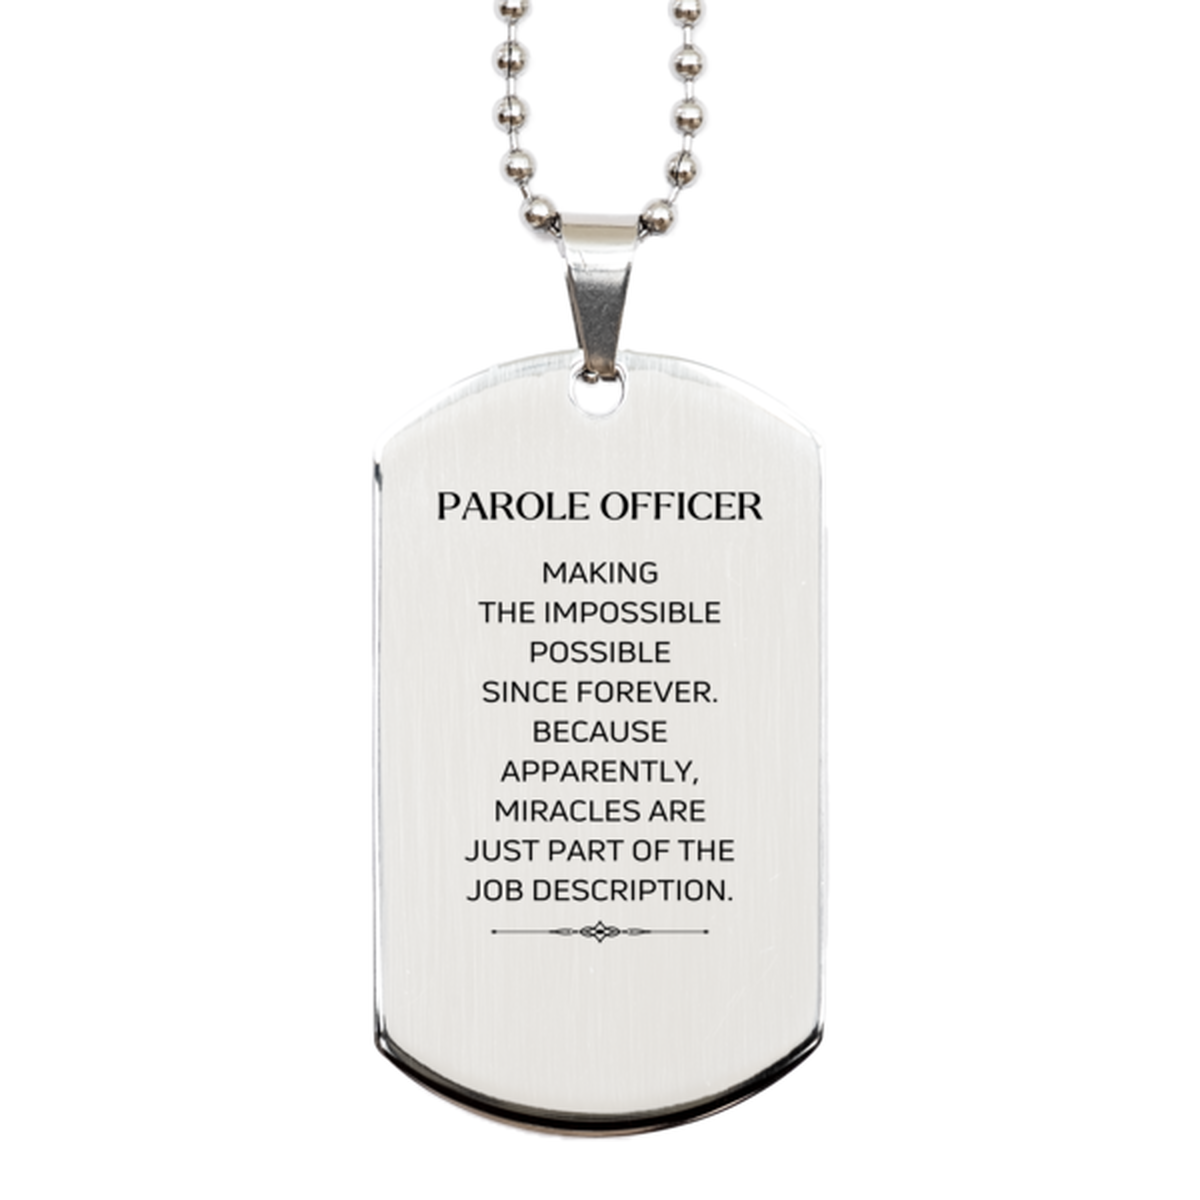 Funny Parole Officer Gifts, Miracles are just part of the job description, Inspirational Birthday Silver Dog Tag For Parole Officer, Men, Women, Coworkers, Friends, Boss